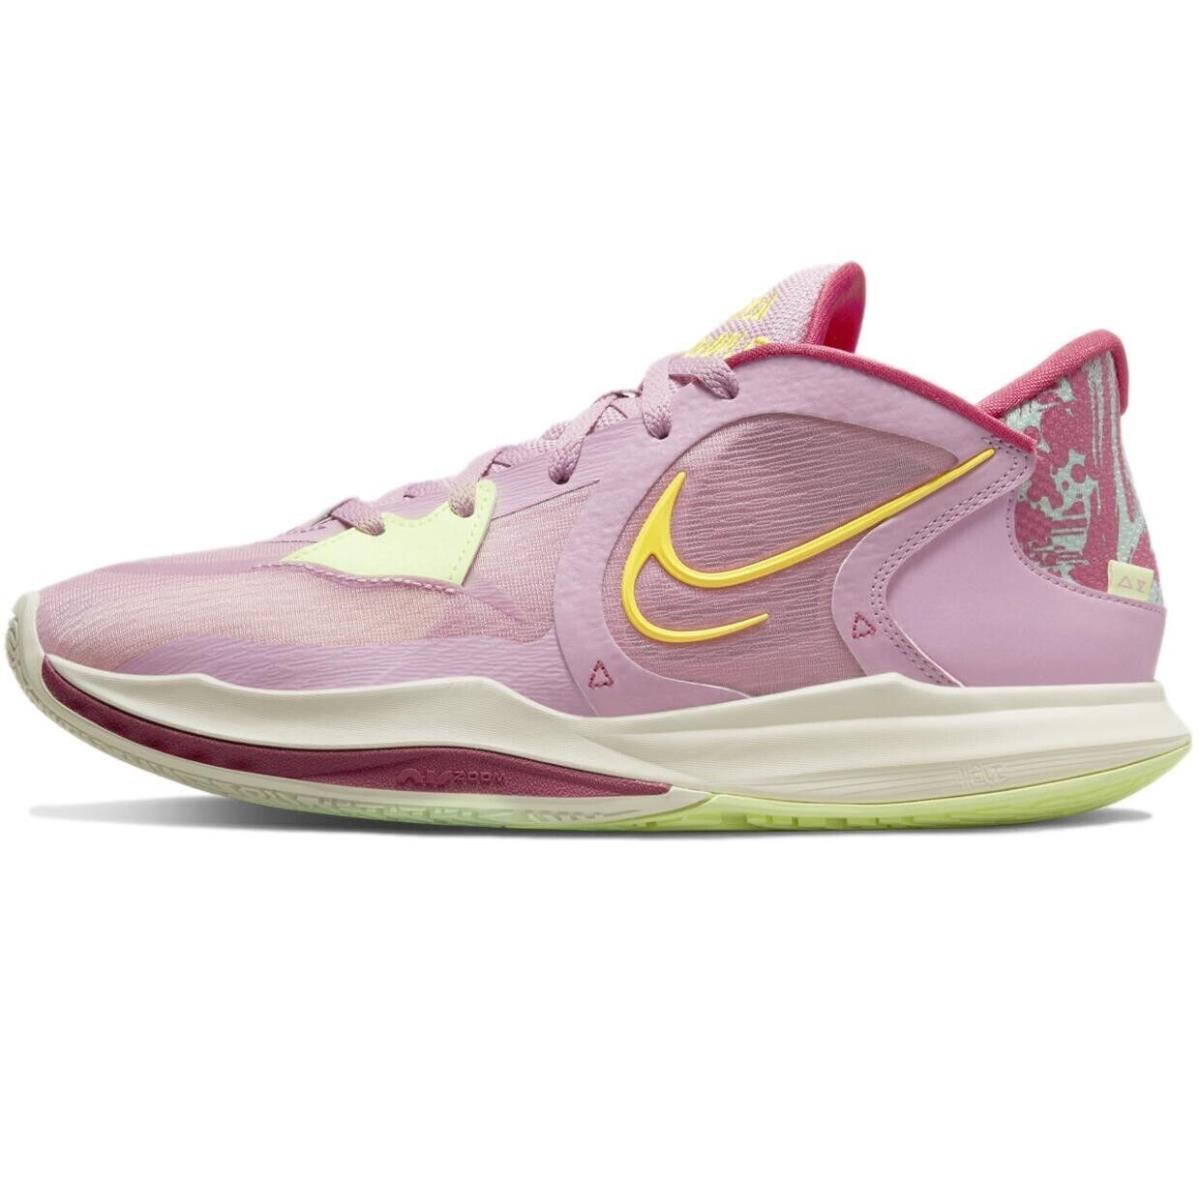 Size 17 - Nike Men`s Kyrie Low 5 `orchid` Basketball Shoes DJ6012-500 - Pink